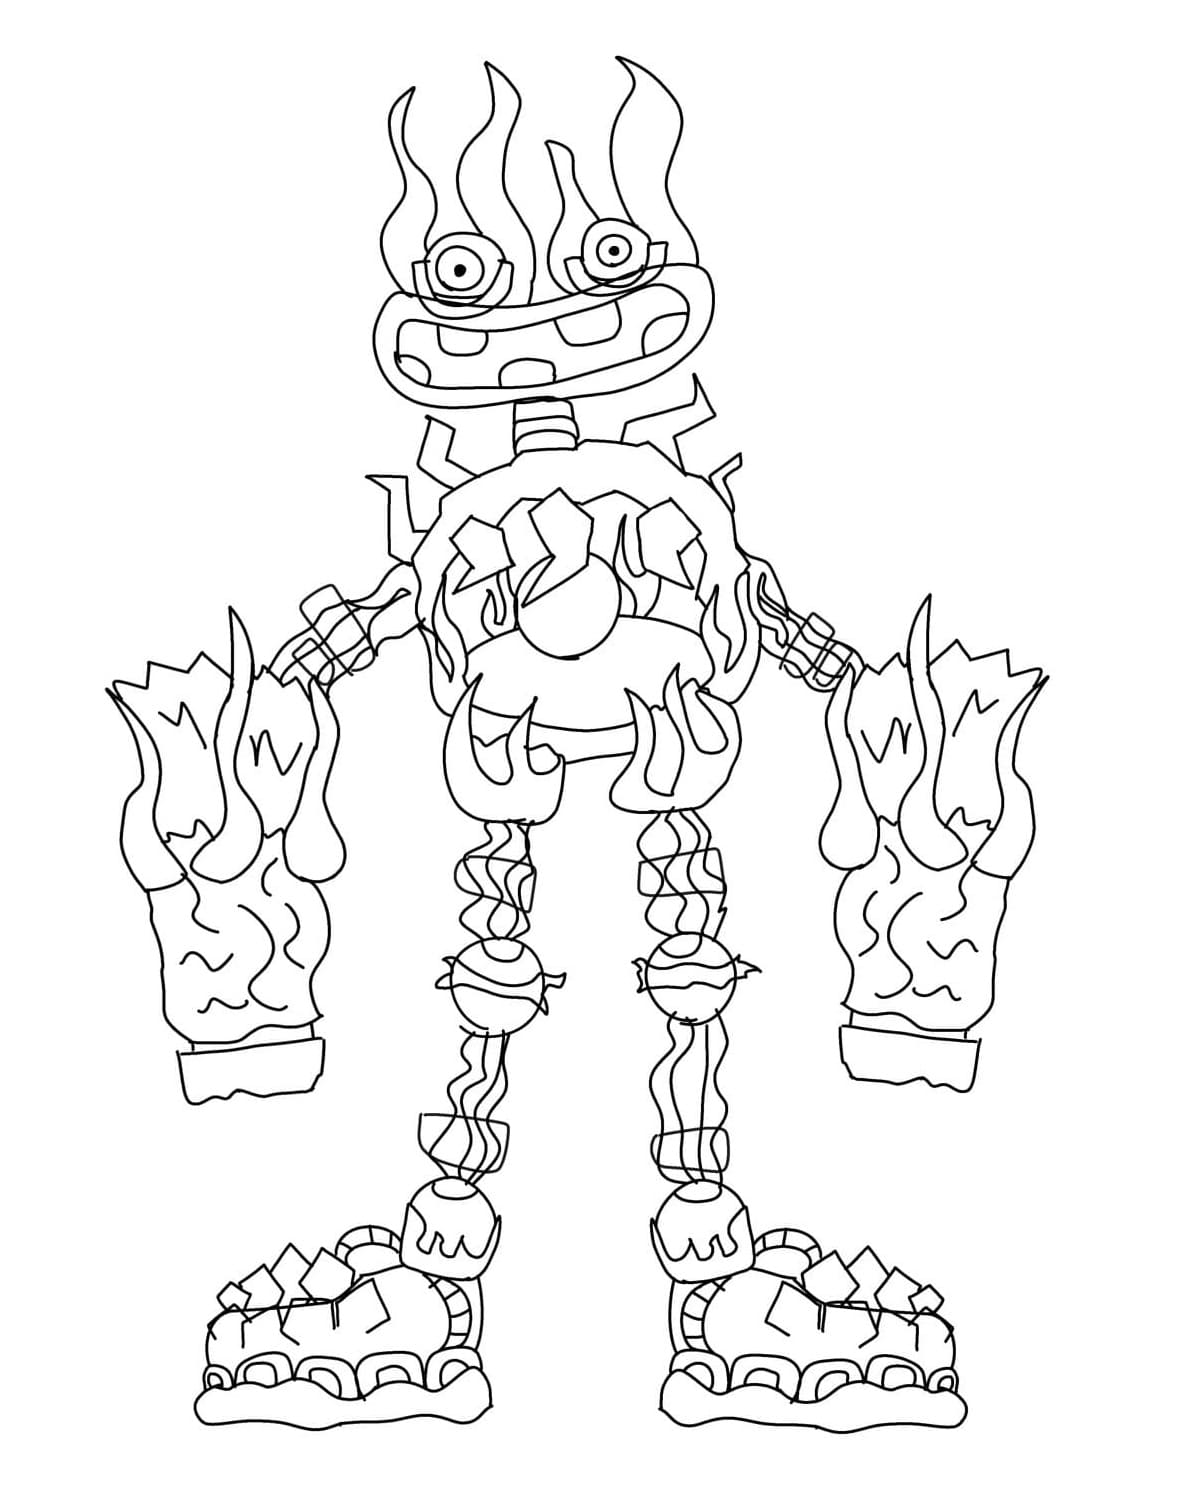 Wubbox Image coloring page - Download, Print or Color Online for Free